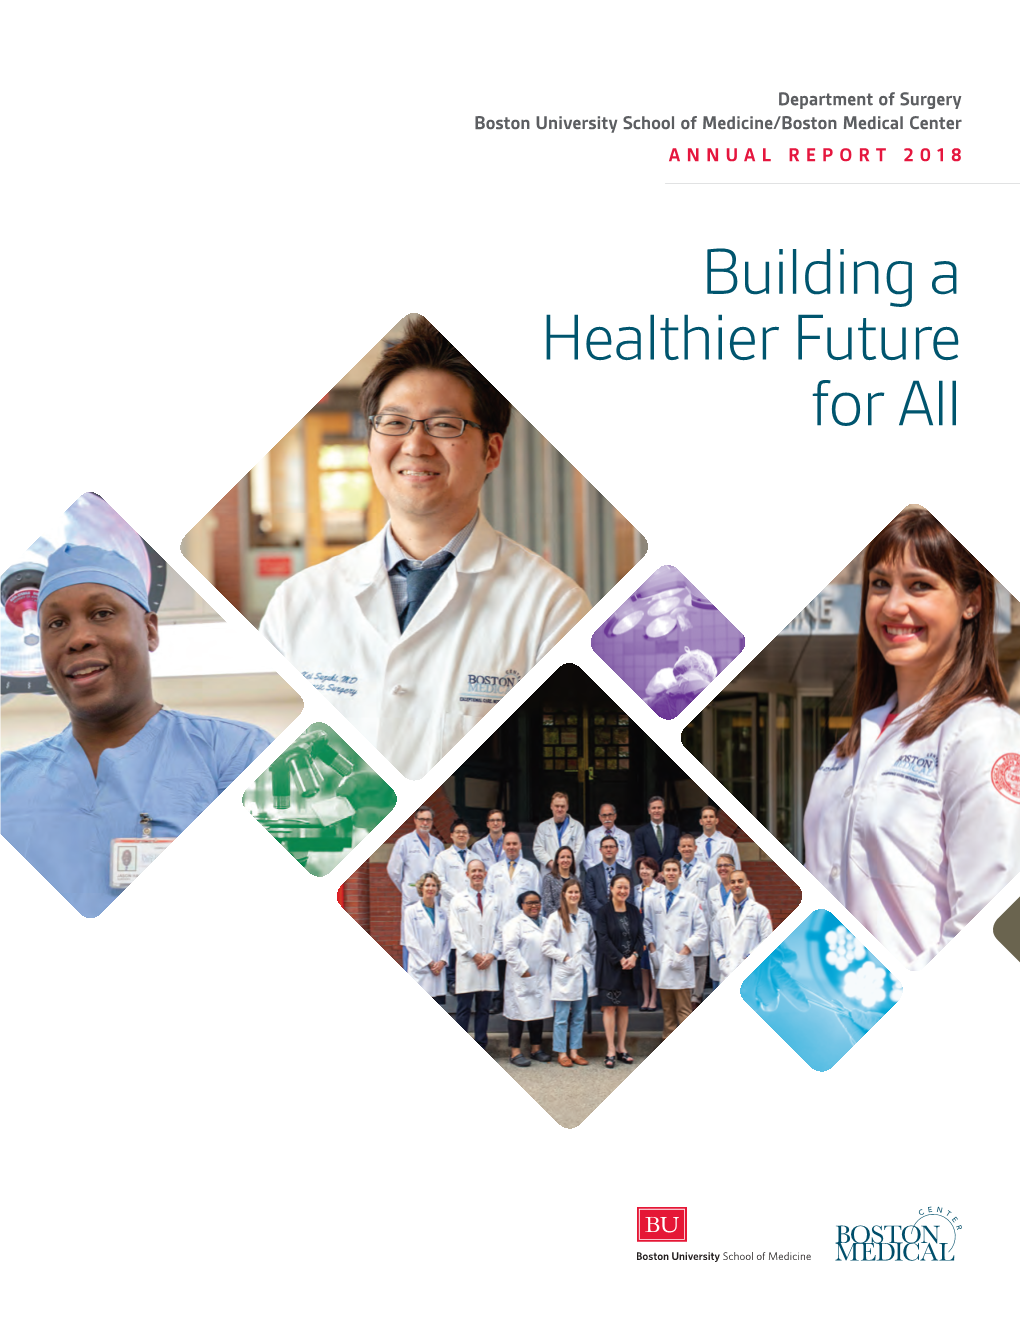 Building a Healthier Future for All Introduction